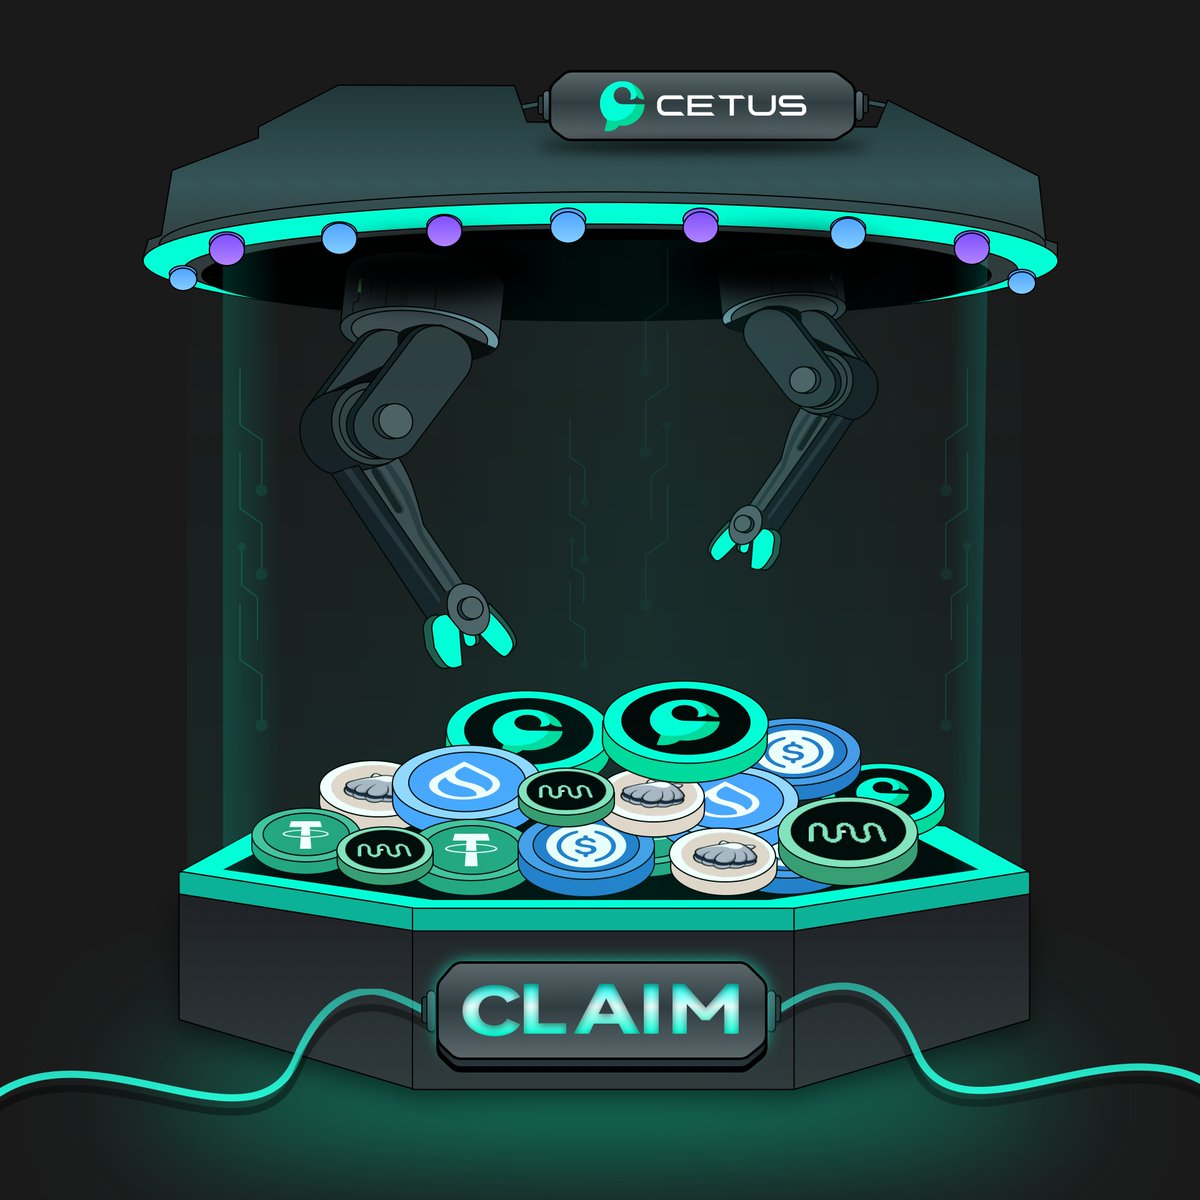 The 'Claim All' feature is now available on #Cetus🥳 We know there are many users who've been expecting this. LPs can now claim fees & mining rewards they've earned from multiple pools at one time. Every small improvement to UX is a big win for us. Stay tuned to more updates🐳